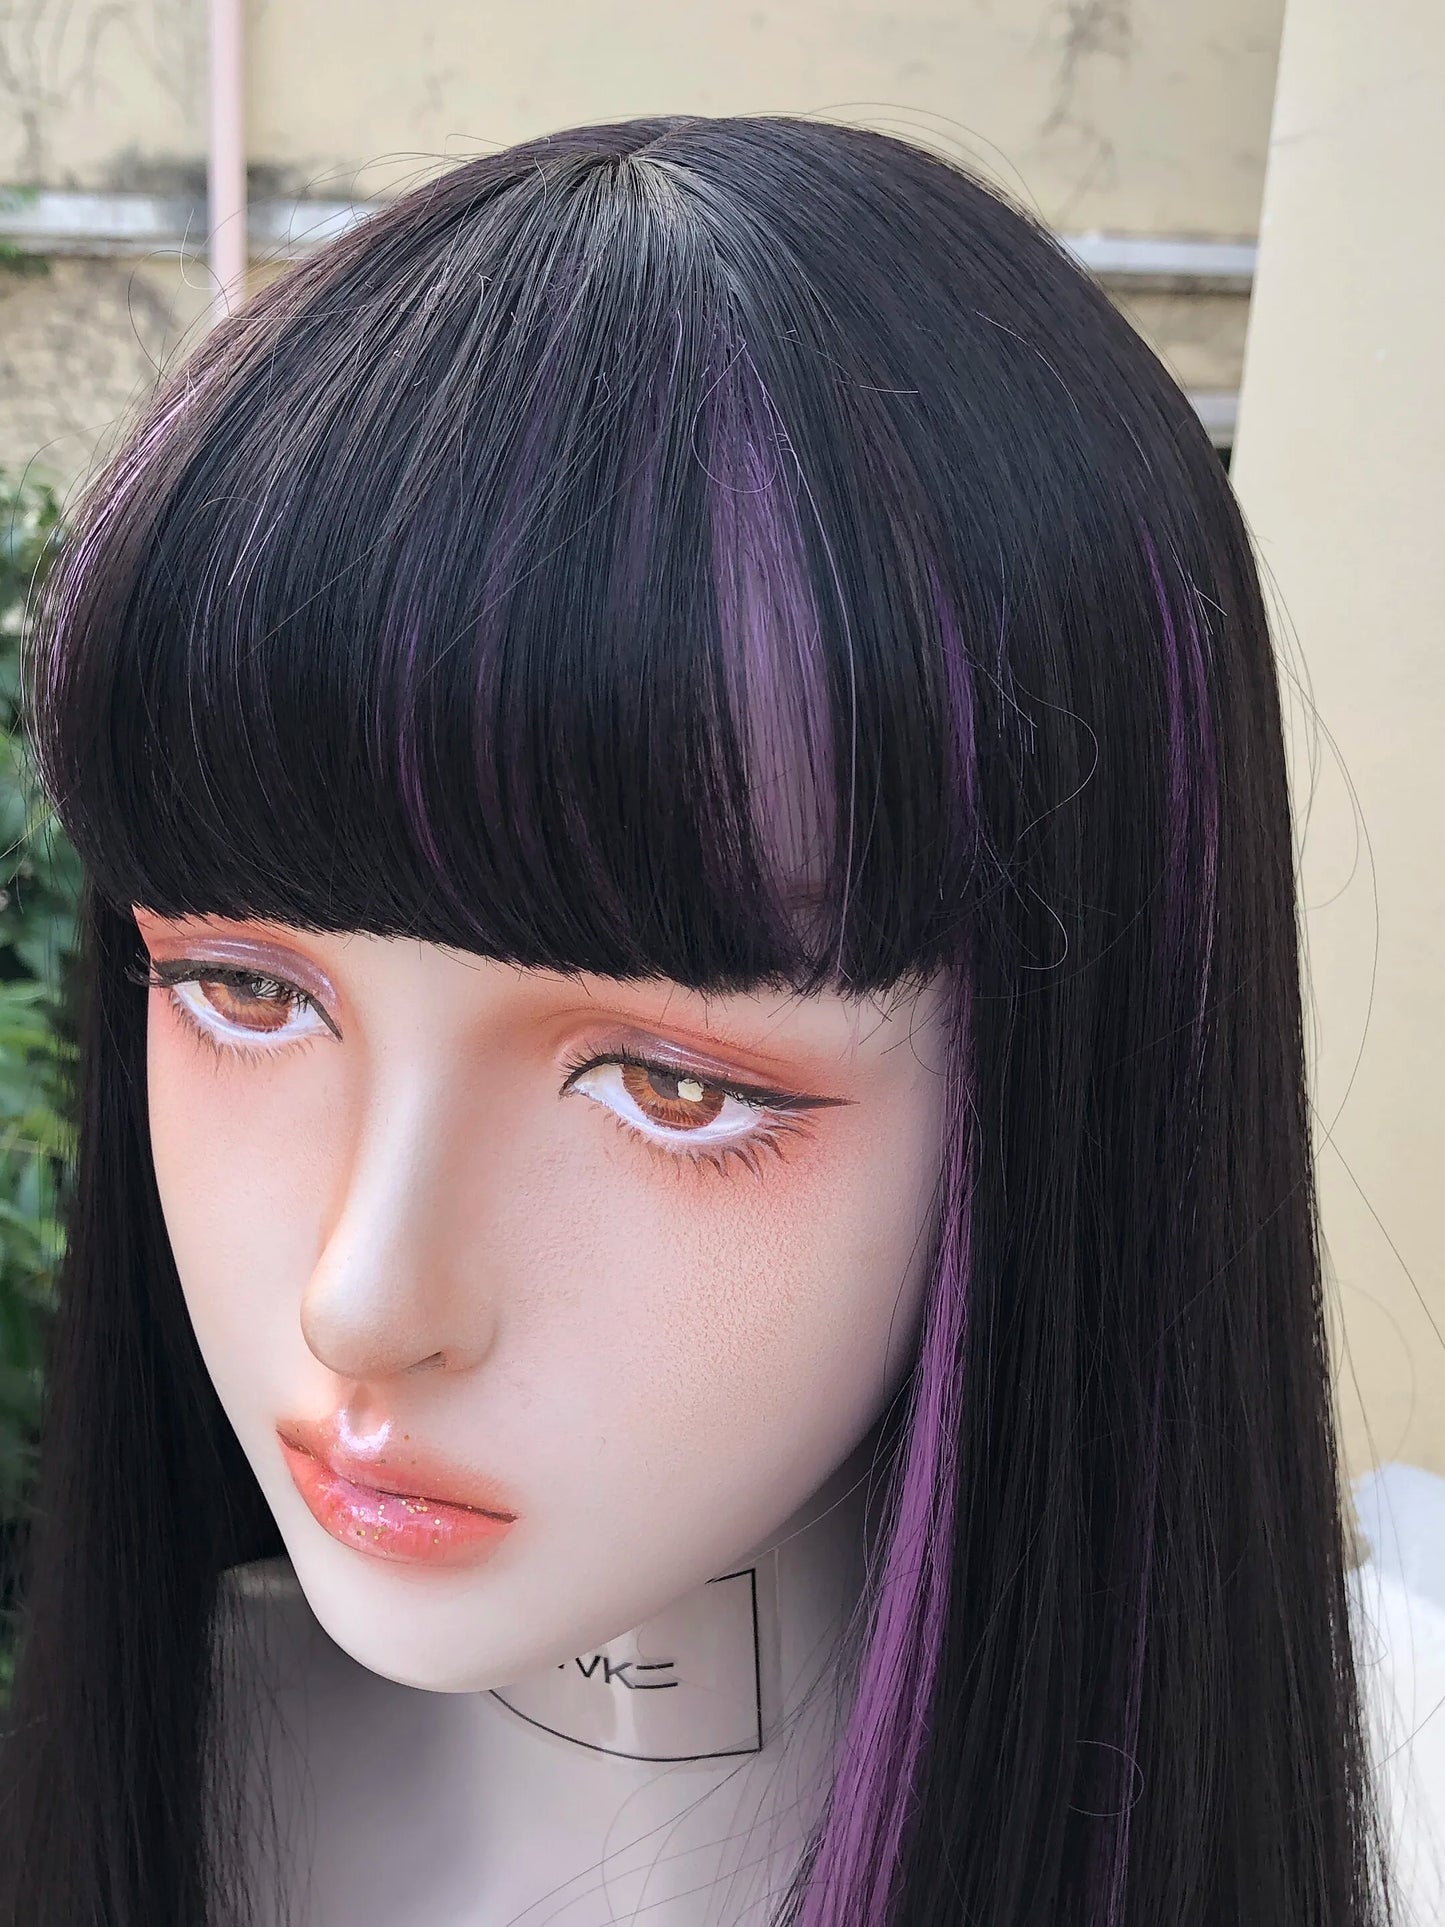 Purple Vintage Gothic Style Bangs Straight Hair Women's Wig Realistic Wigs